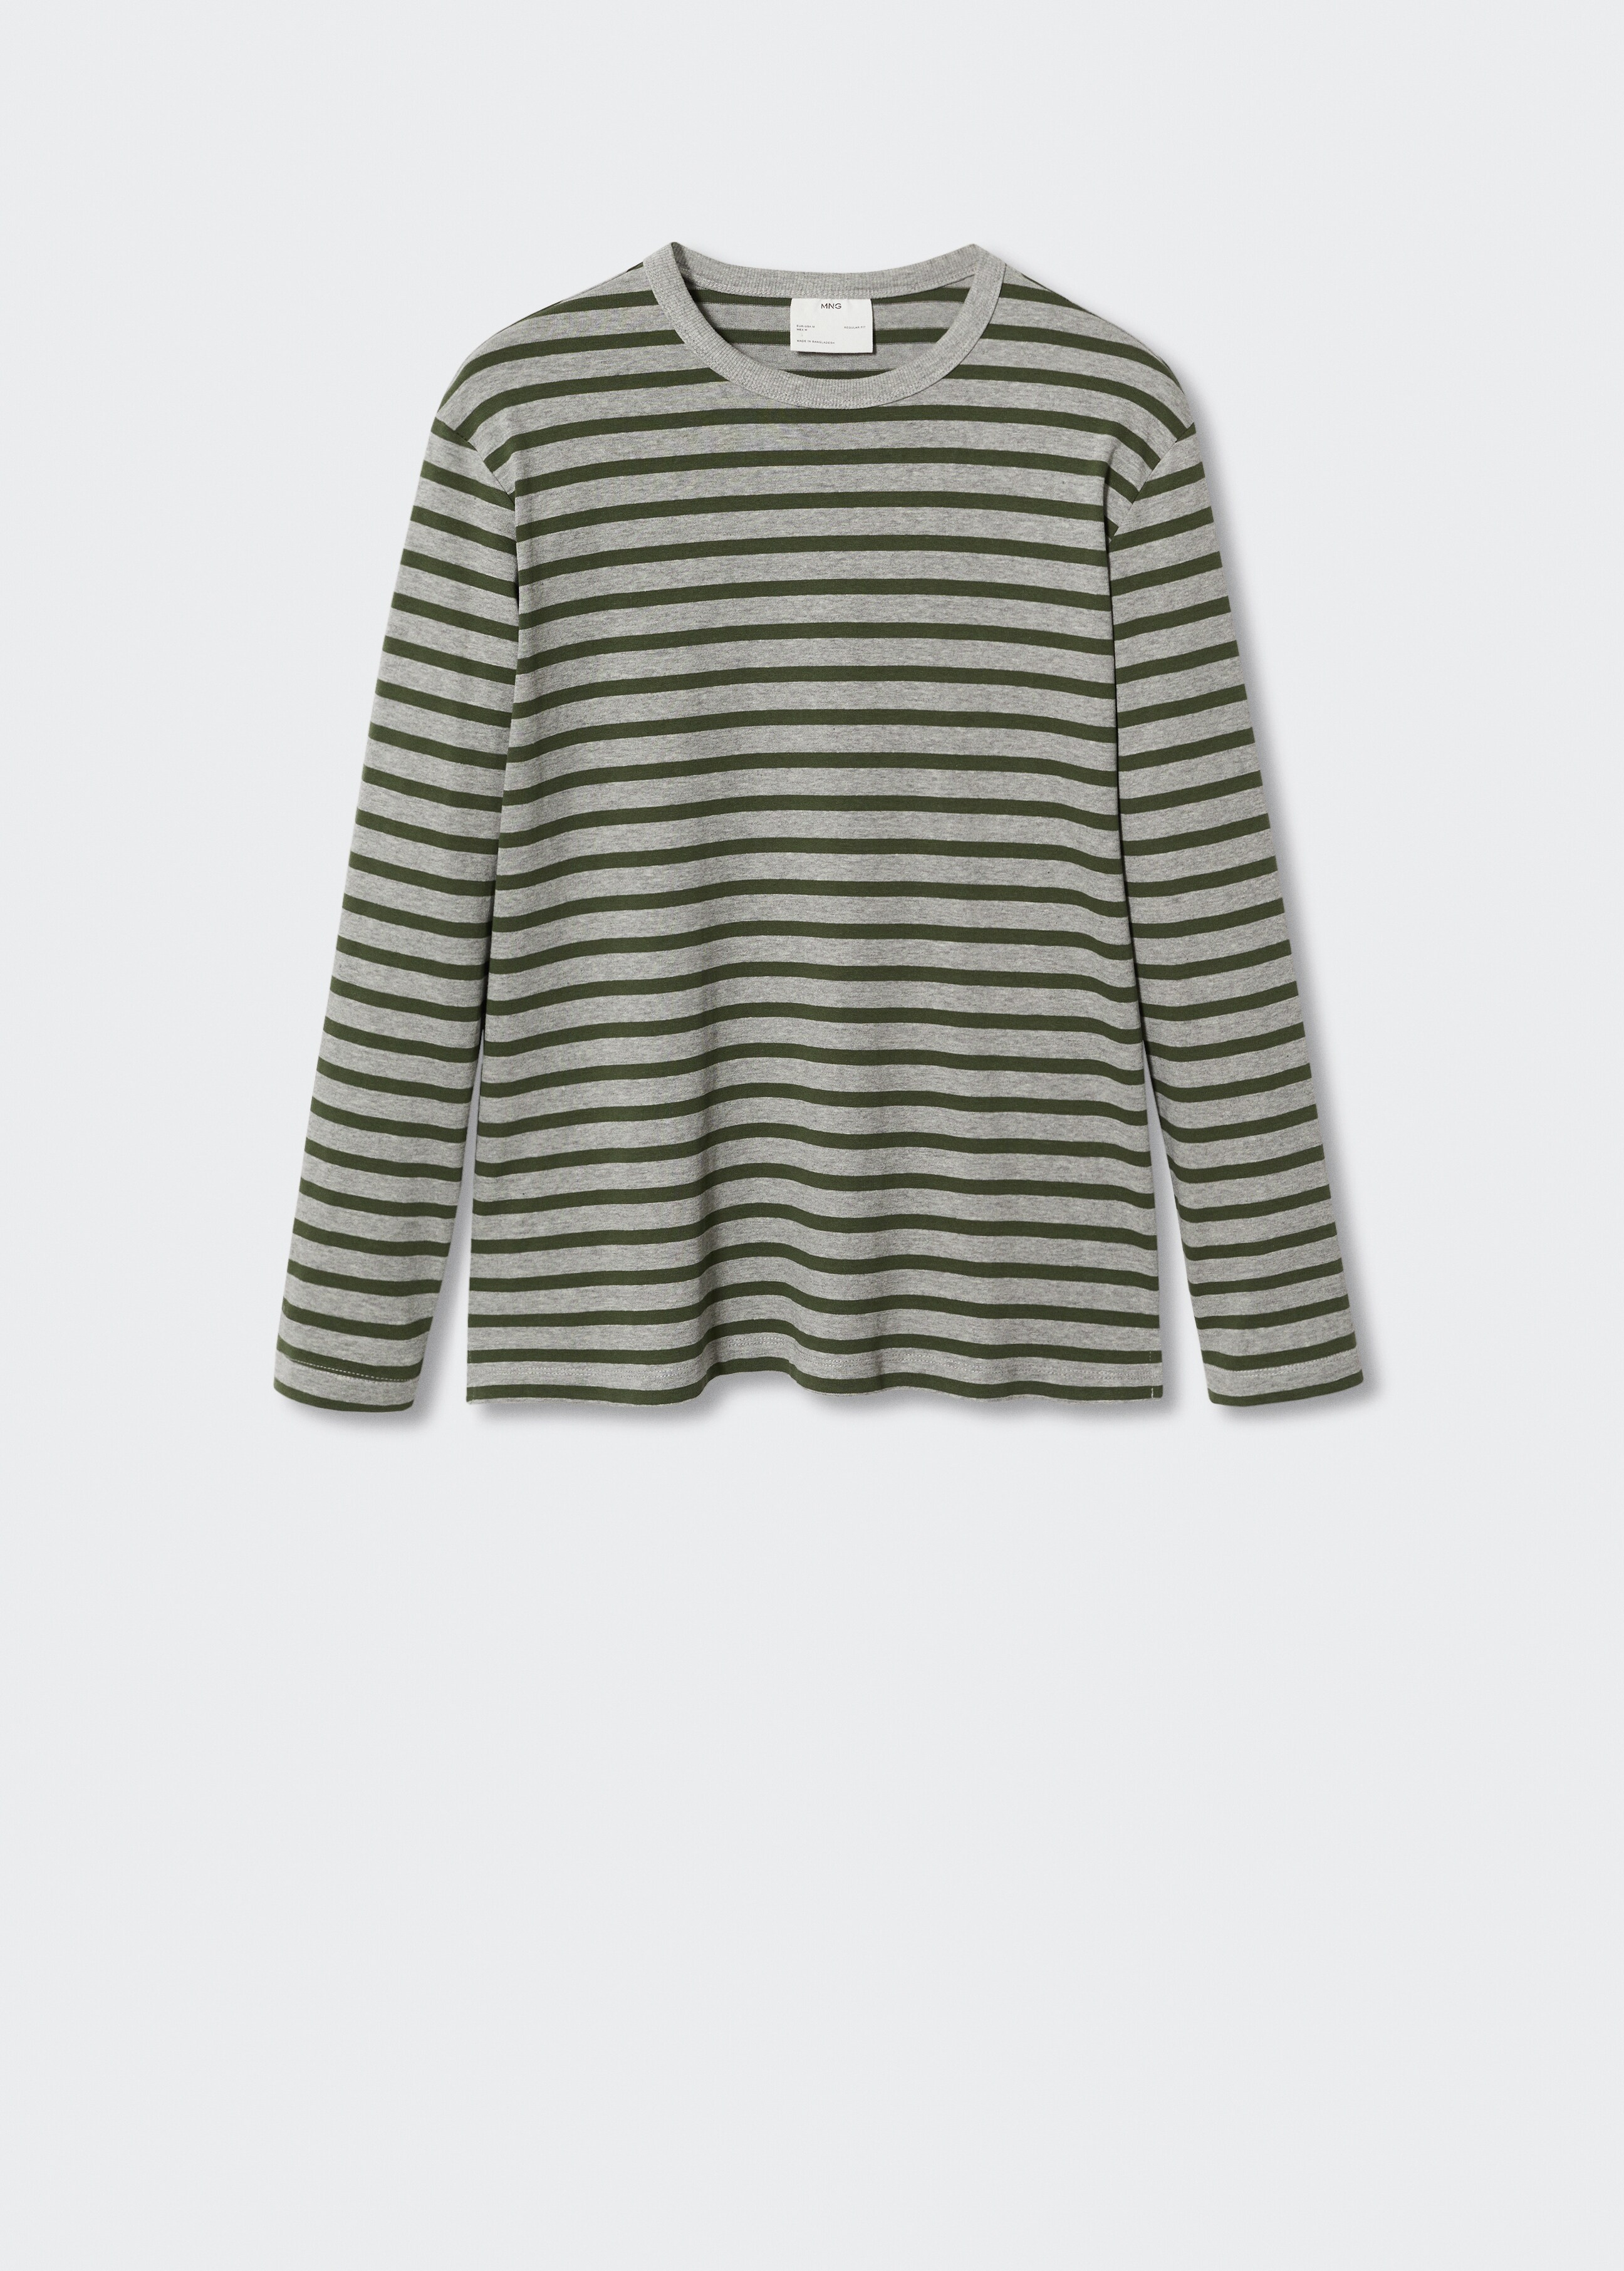 Striped long sleeves t-shirt - Article without model